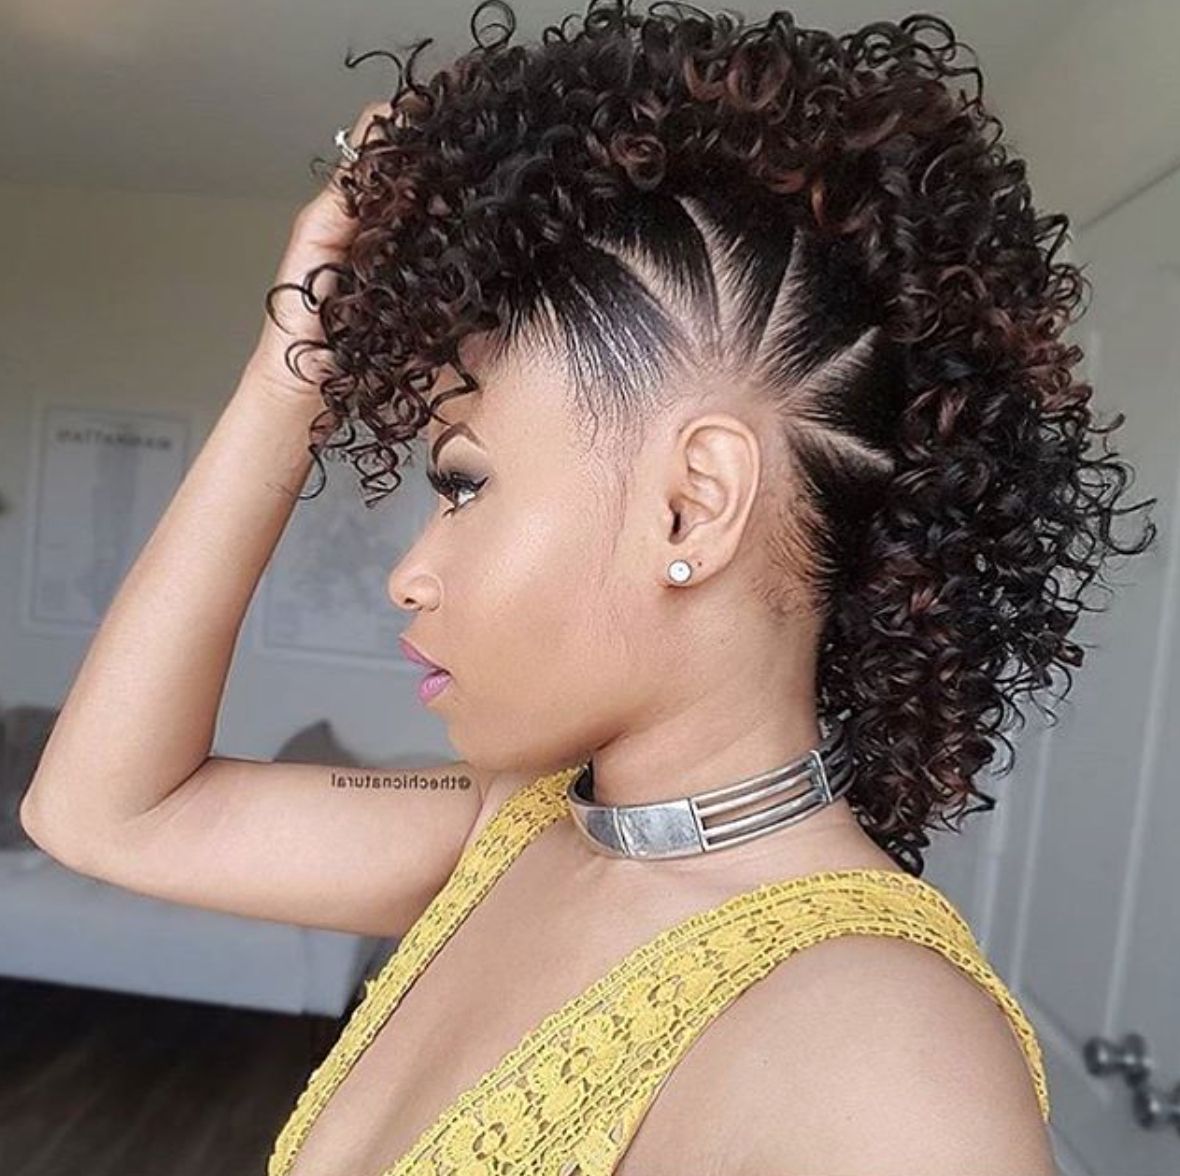 2020 Fierce Mohawk Hairstyles With Curly Hair In Super Cute Fauxhawk @thechicnatural – Black Hair Information (View 3 of 20)